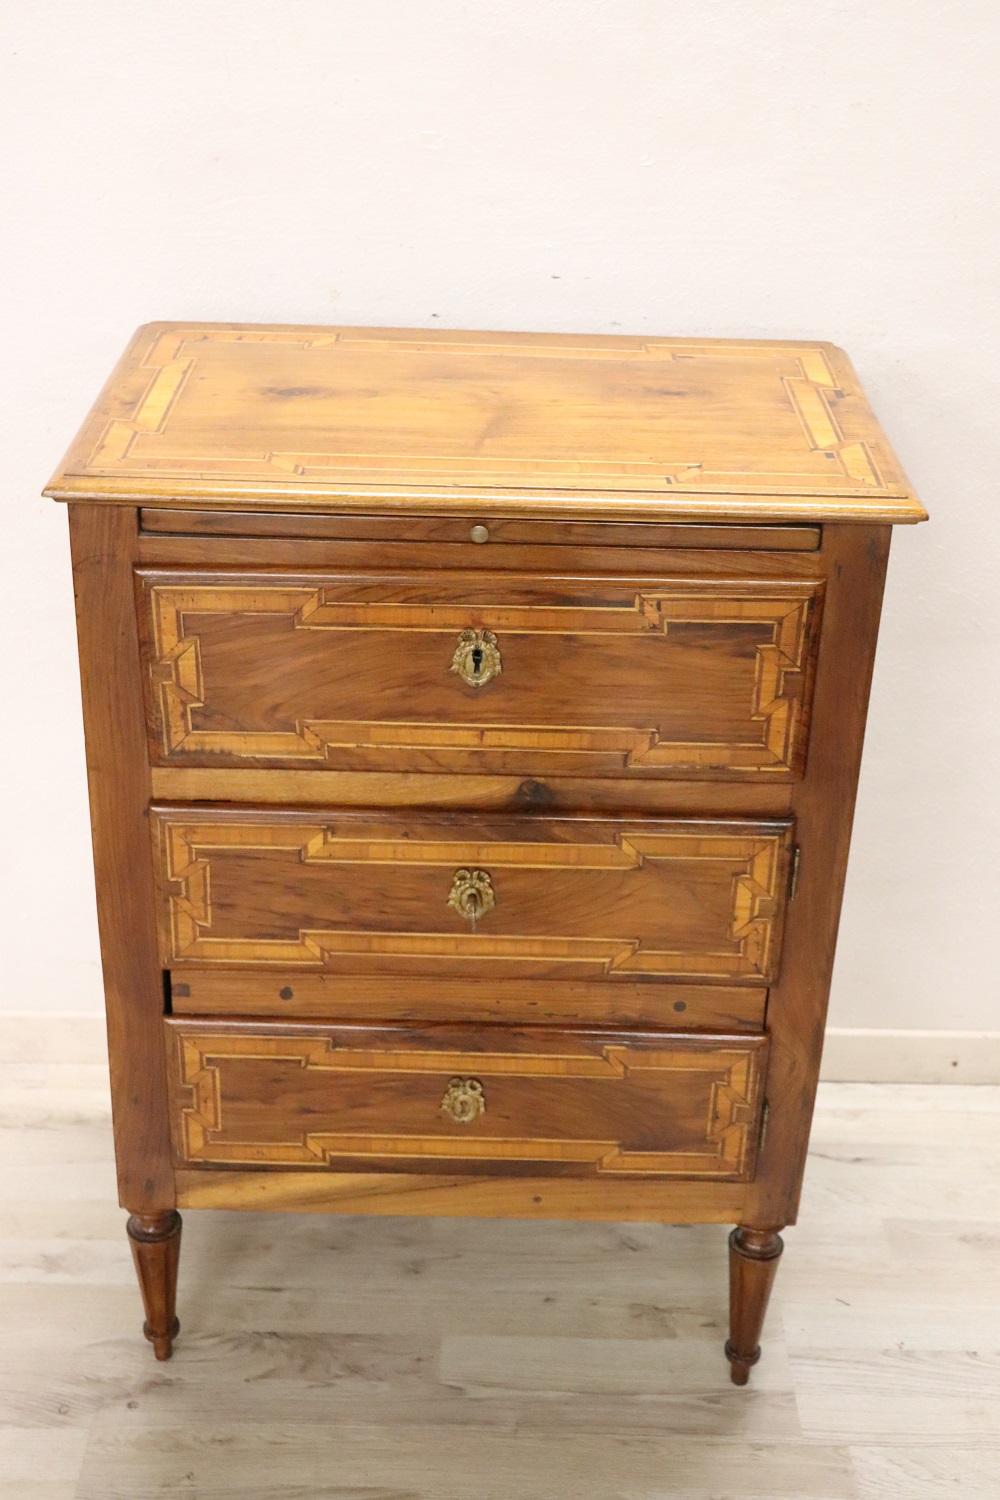 Lovely Italian Louis XVI style small chest of drawers, early 19th century in solid walnut wood. Inlaid decoration of geometric taste. On the front two fake drawers hide a large compartment available. Under the top there is an extractable top that